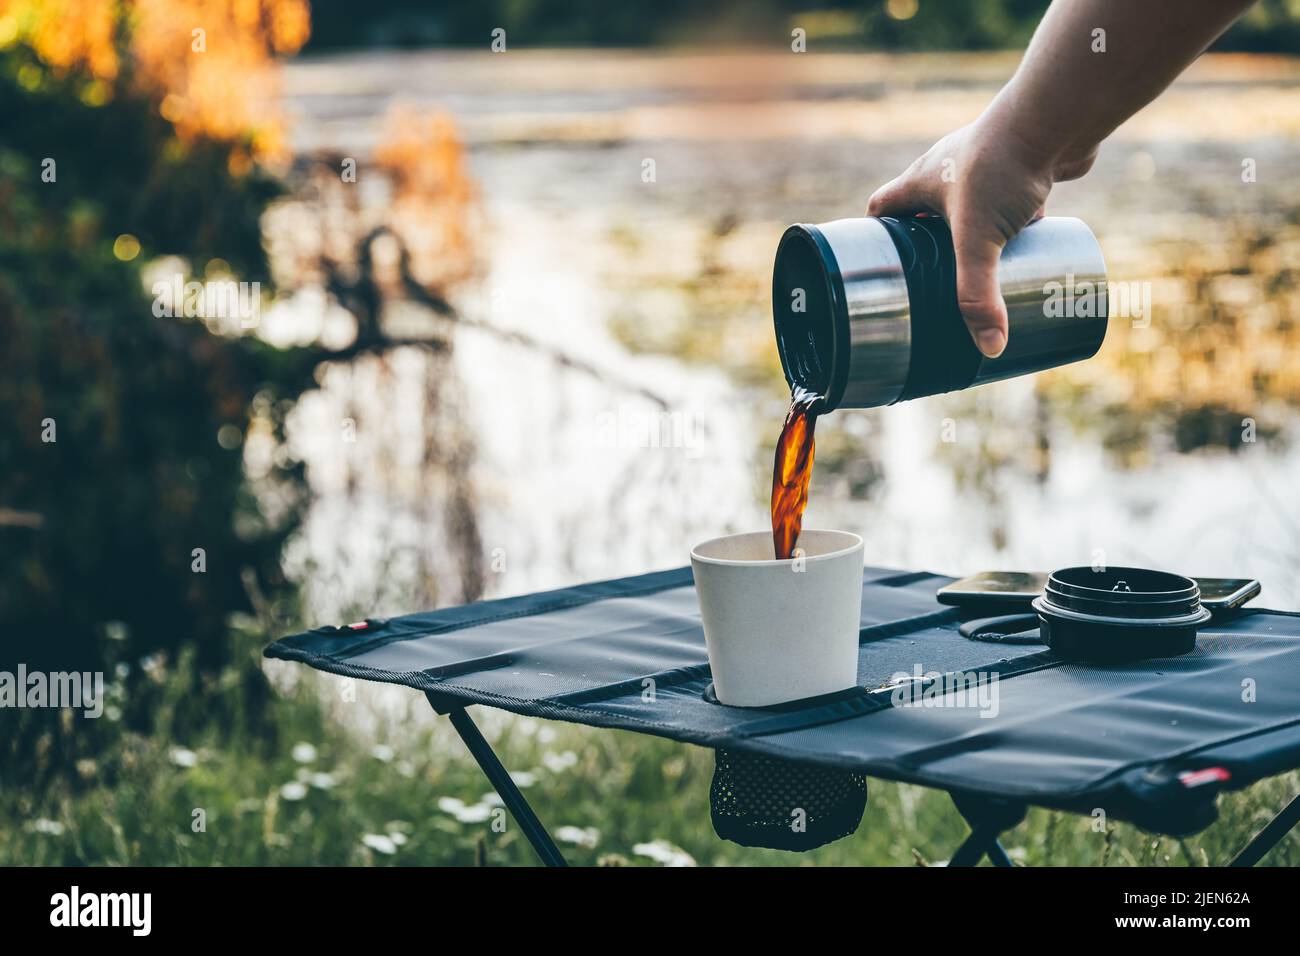 Pouring hot black coffee in reusable bamboo cup on camping table outdoors during early morning hours. Making freshly brewed coffee in nature Stock Photo